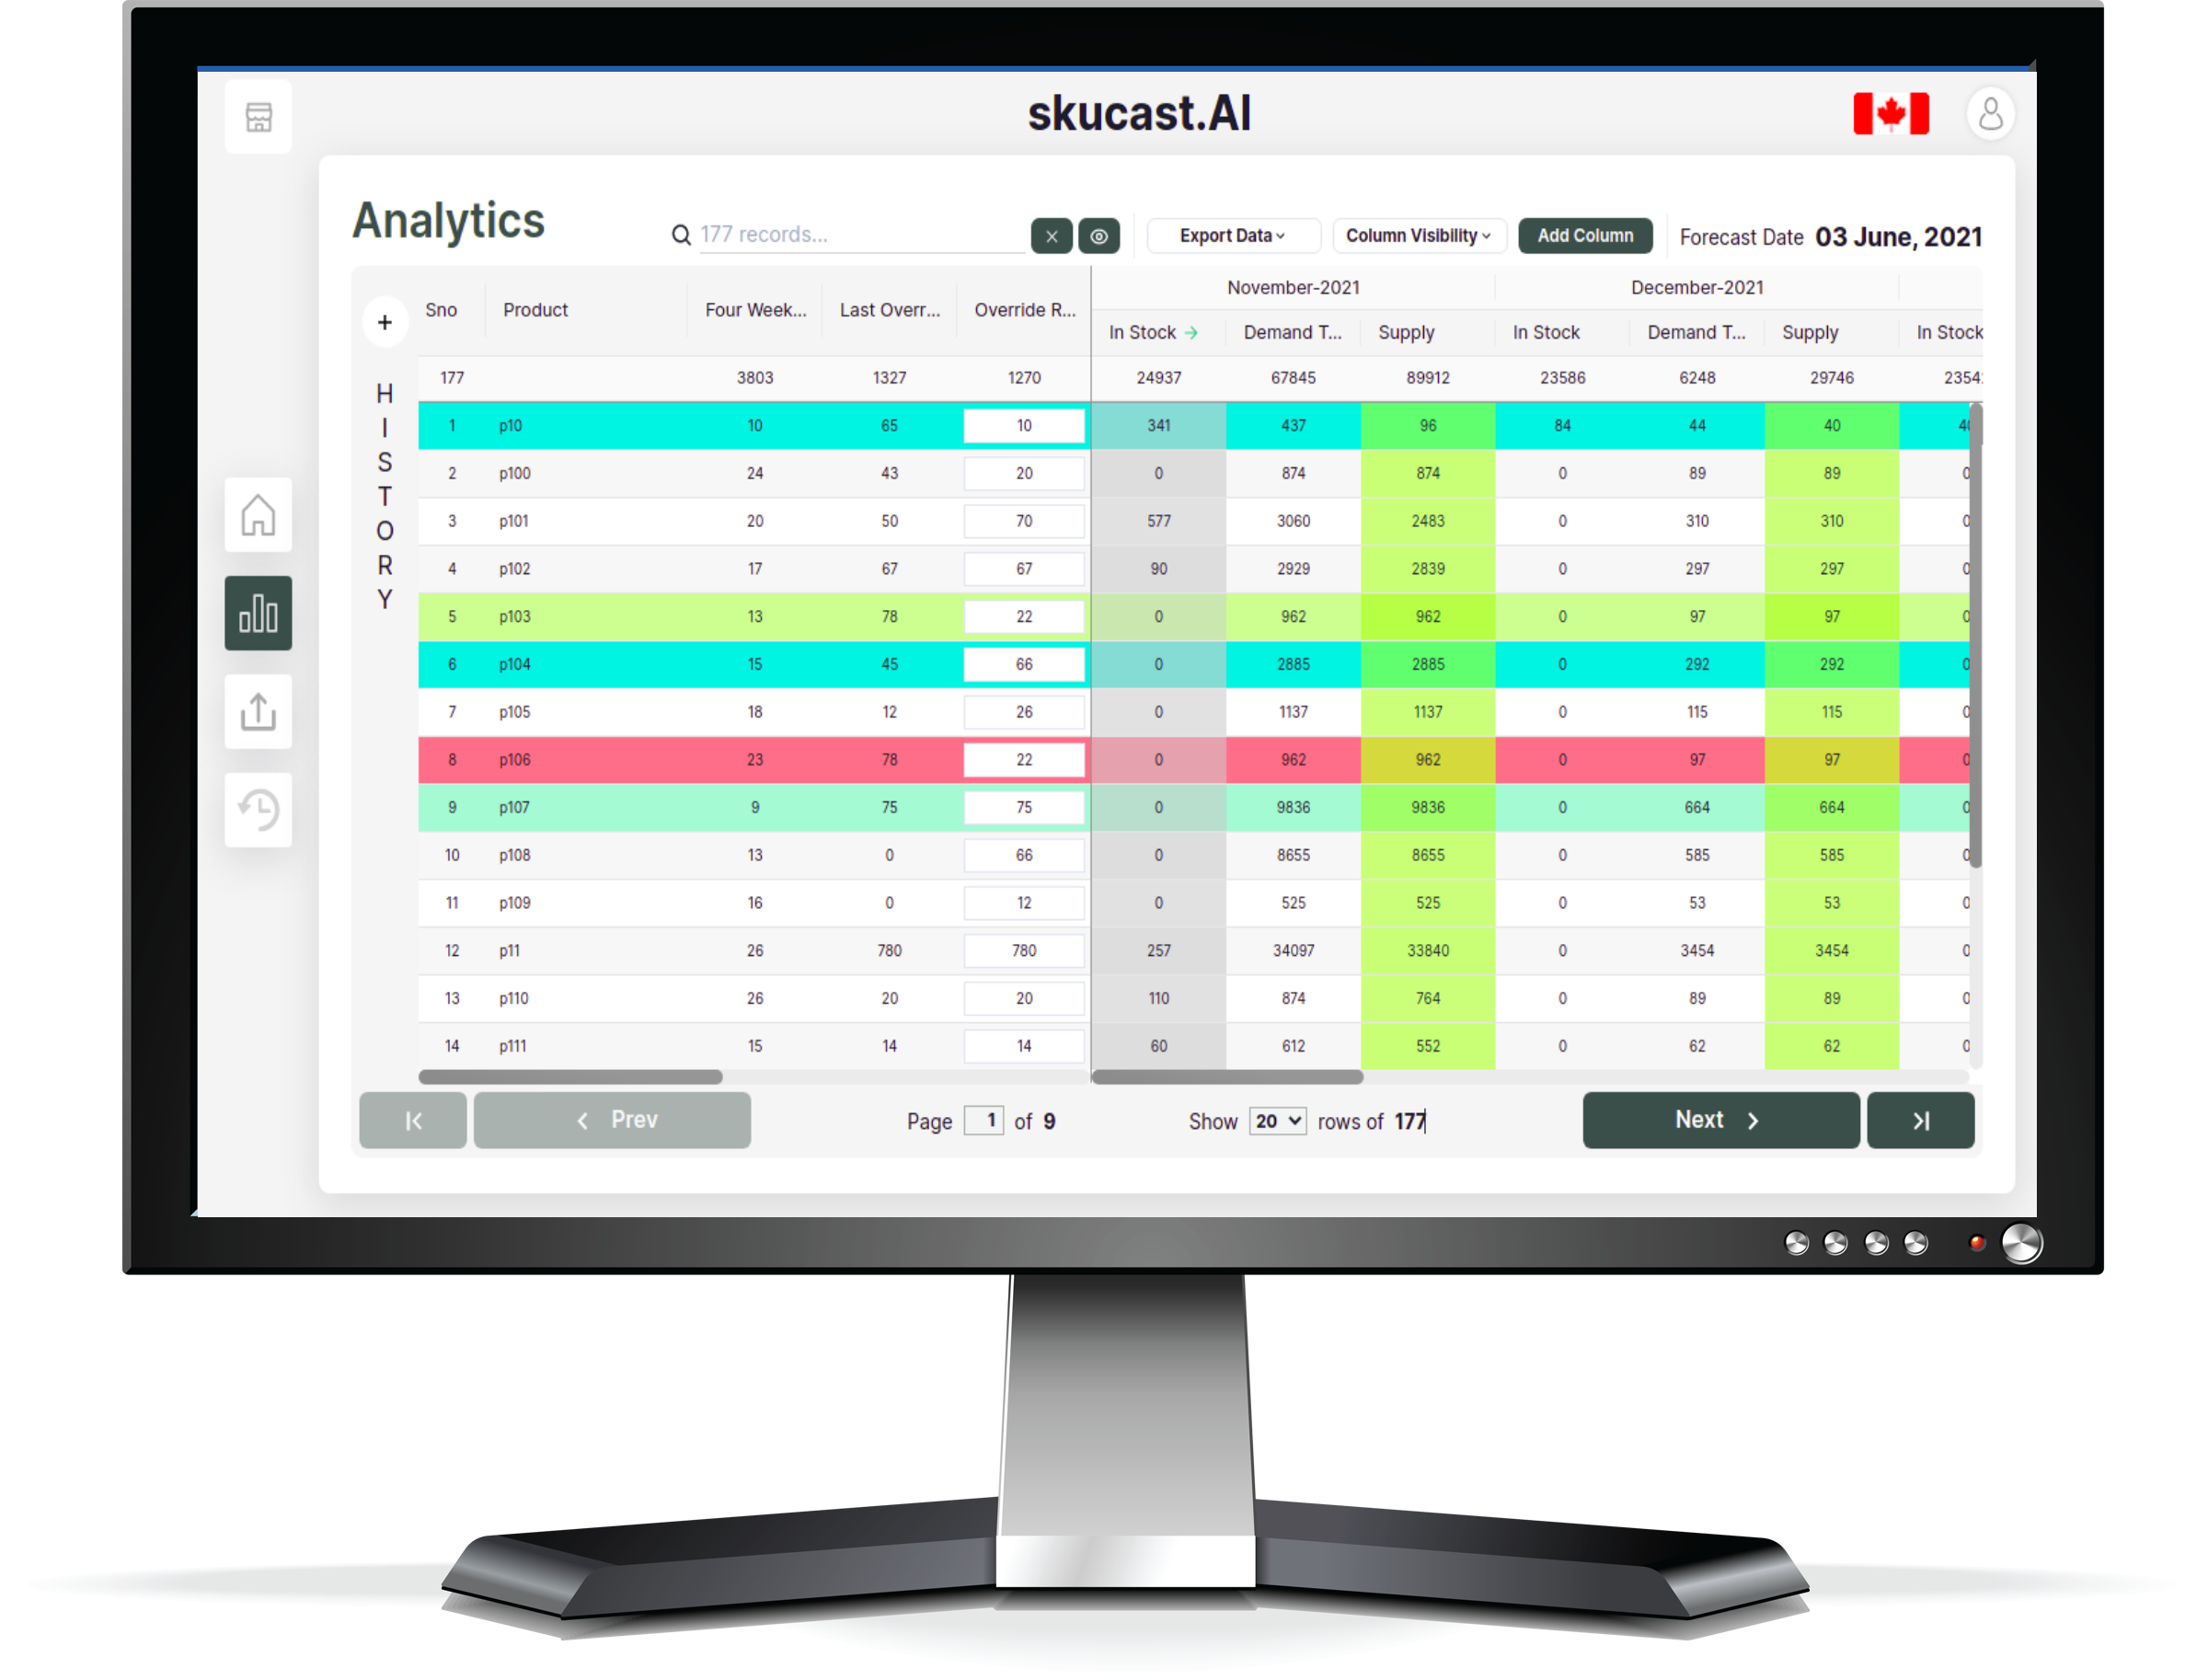 Get All your Data in single Excel Like View. Feature Rich user interface. Single View for All Data Custom colour assignment to rows, drag-able columns to adjust sequence, collapsible history view and much more